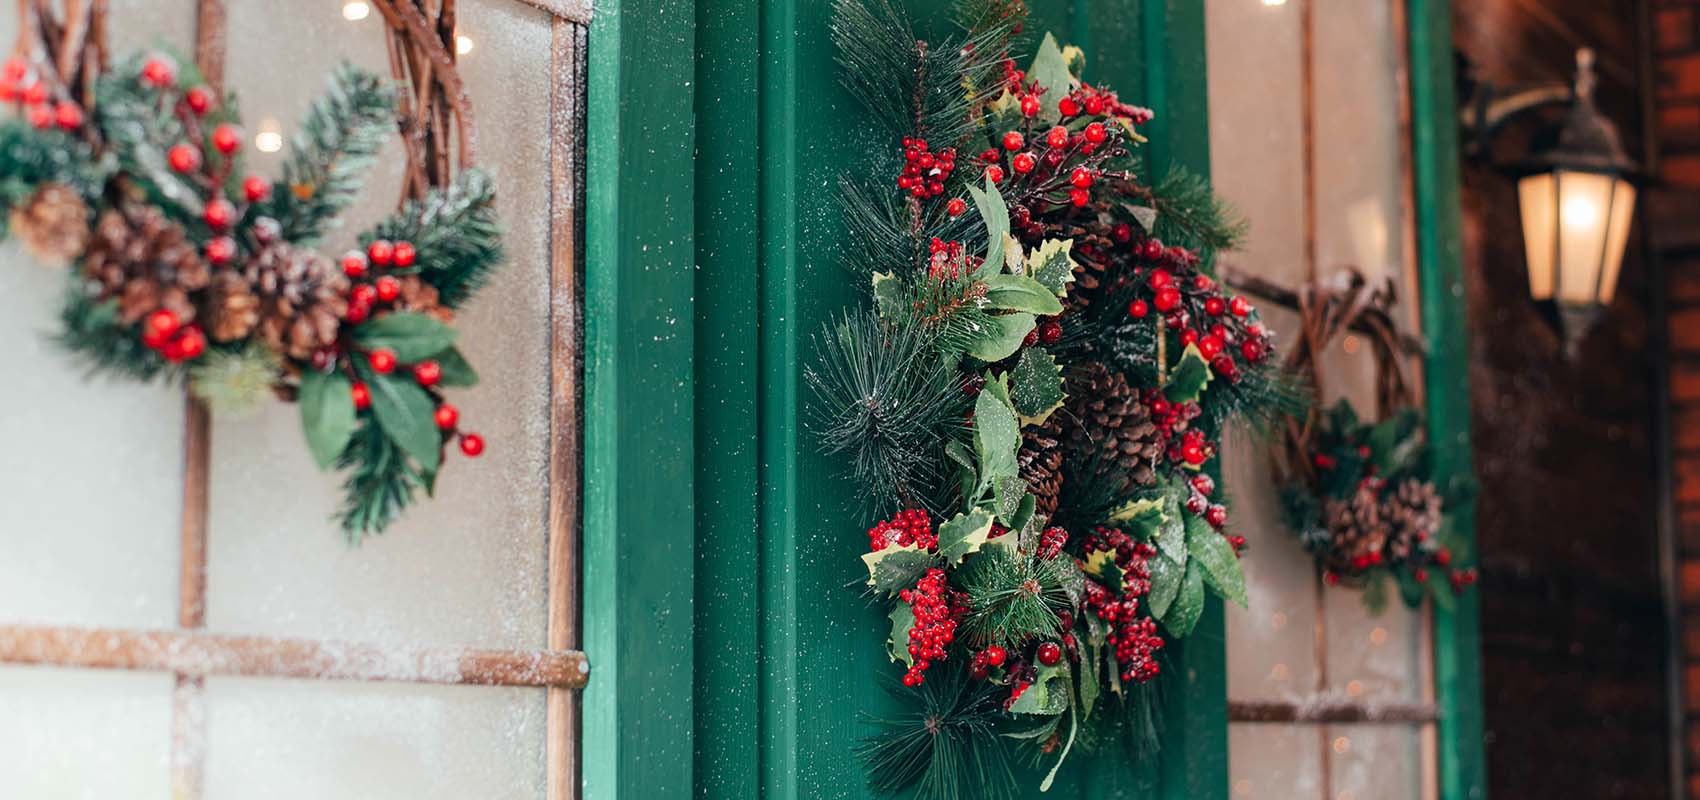 Porch with wooden doors and a threshold with Christmas decor